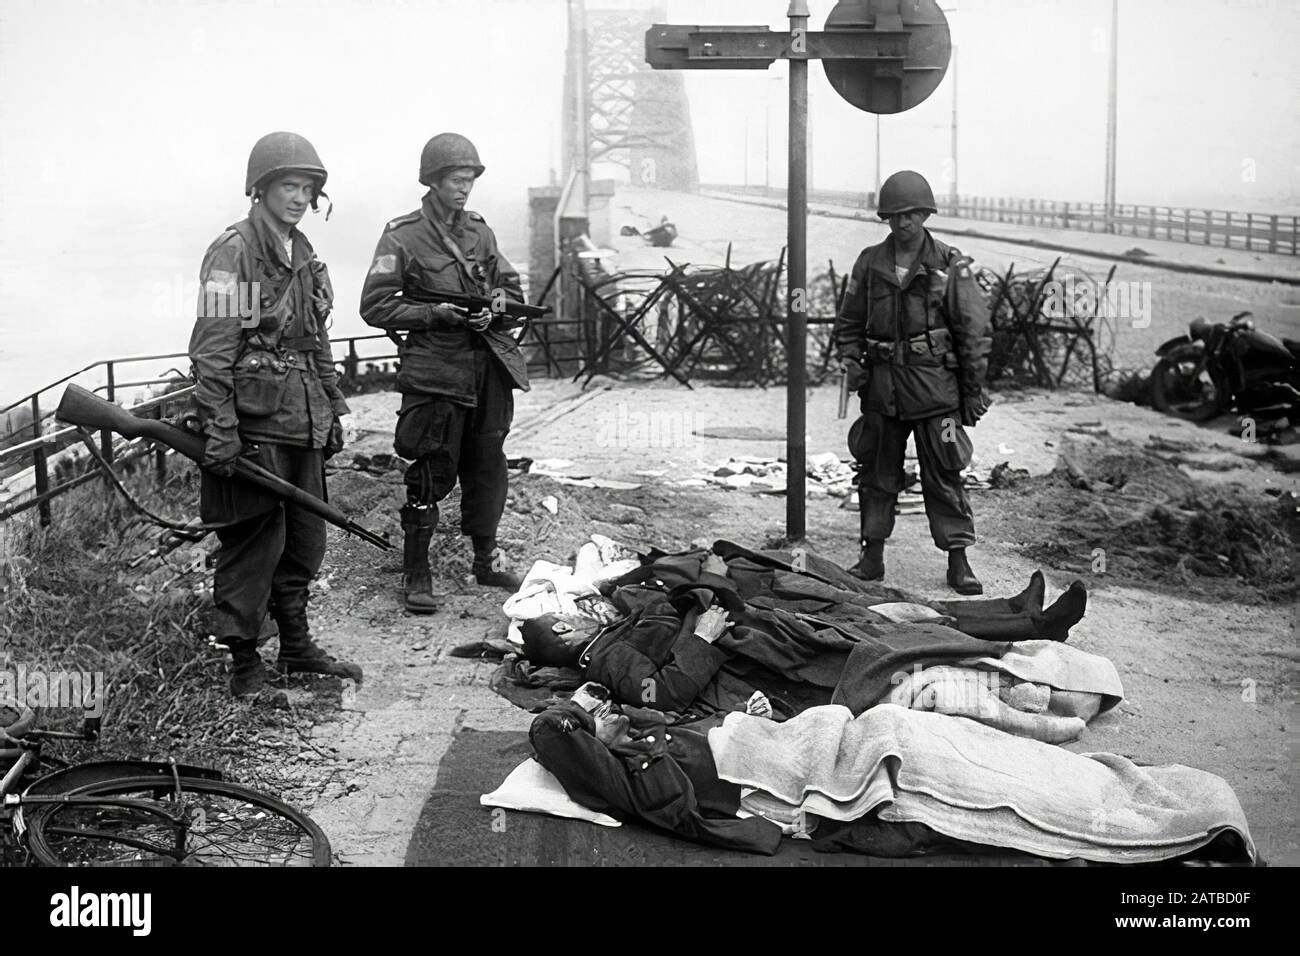 U.S. 82nd Airborne paratroopers guard wounded German soldiers at the Waalbrug, Nijmegen, 1944 Stock Photo